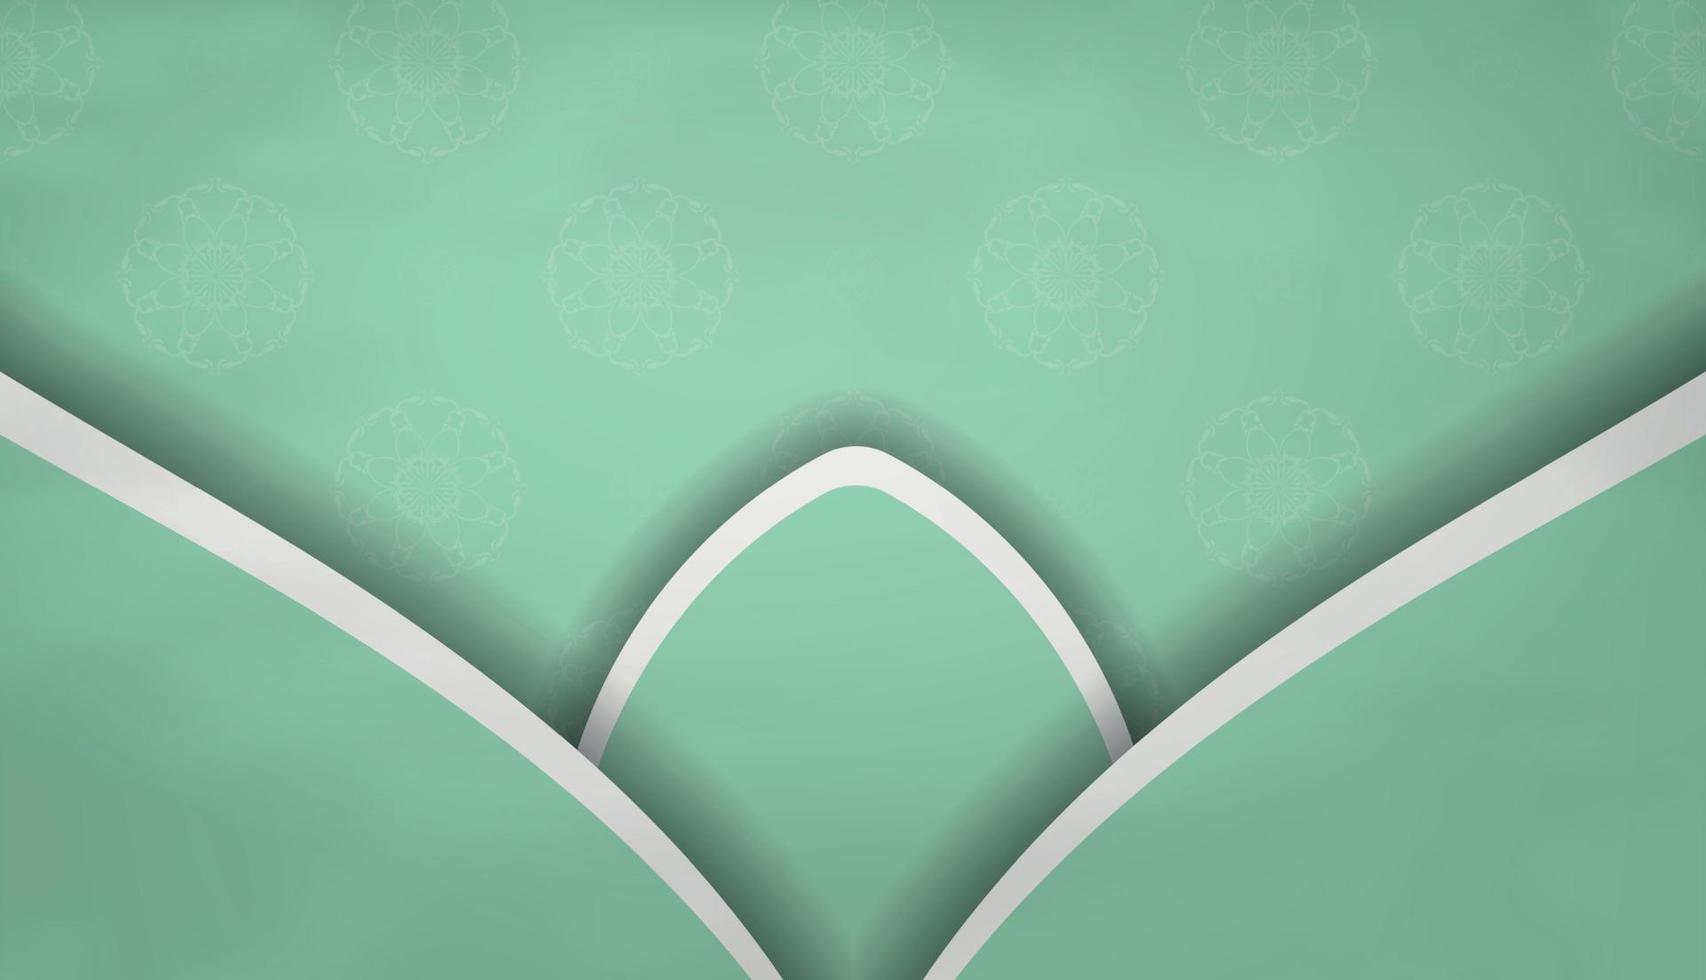 Mint colored banner with Indian white ornaments and text space vector